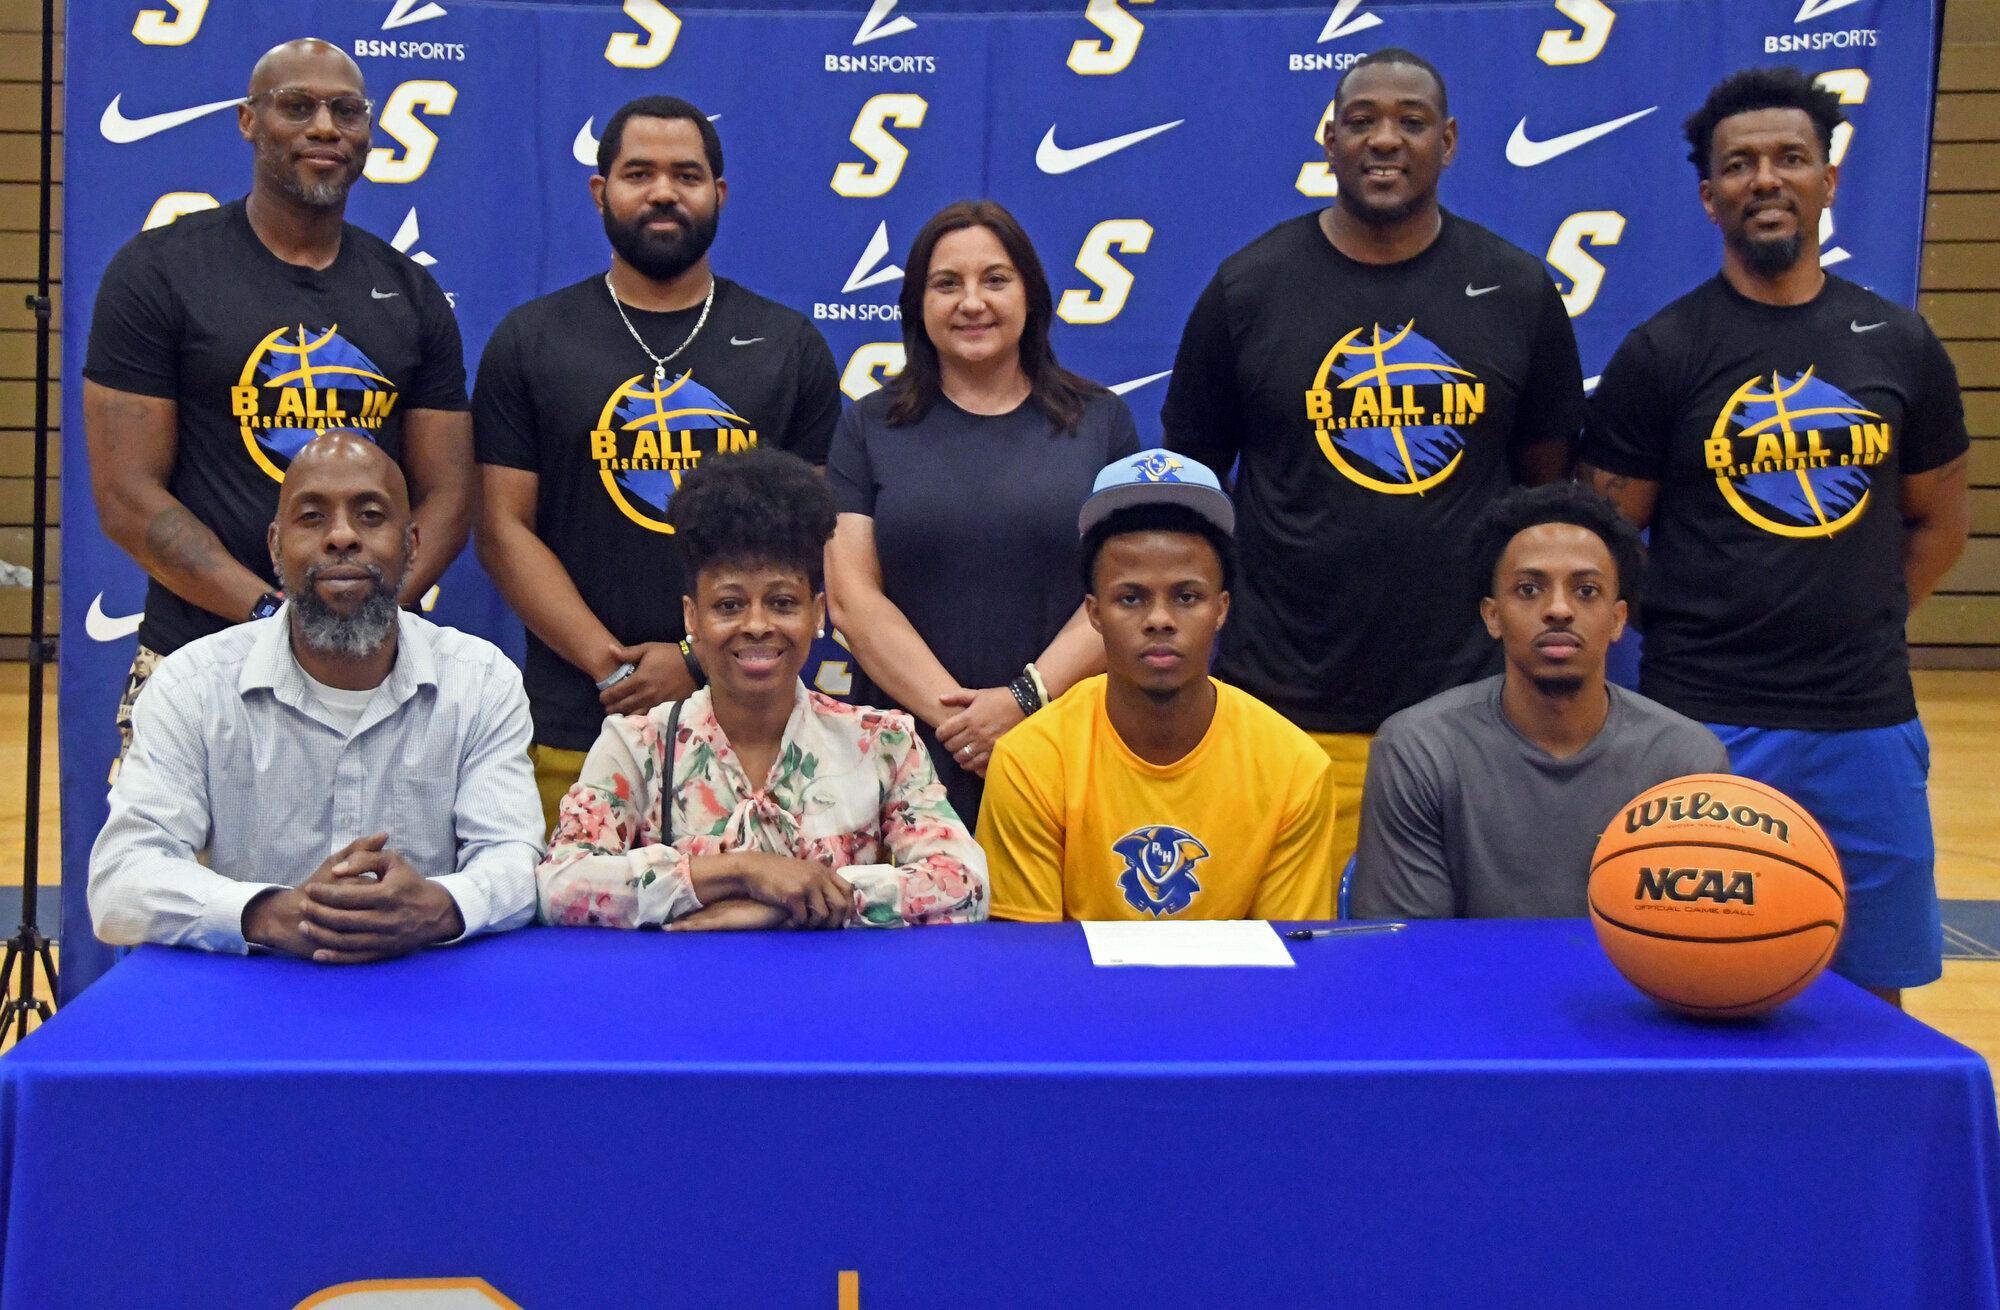 Sumter High's Caleb Jenkins, seated center right, is surrounded by family, coaches and administrators after signing to continue his basketball career at Patrick and Henry on Thursday.